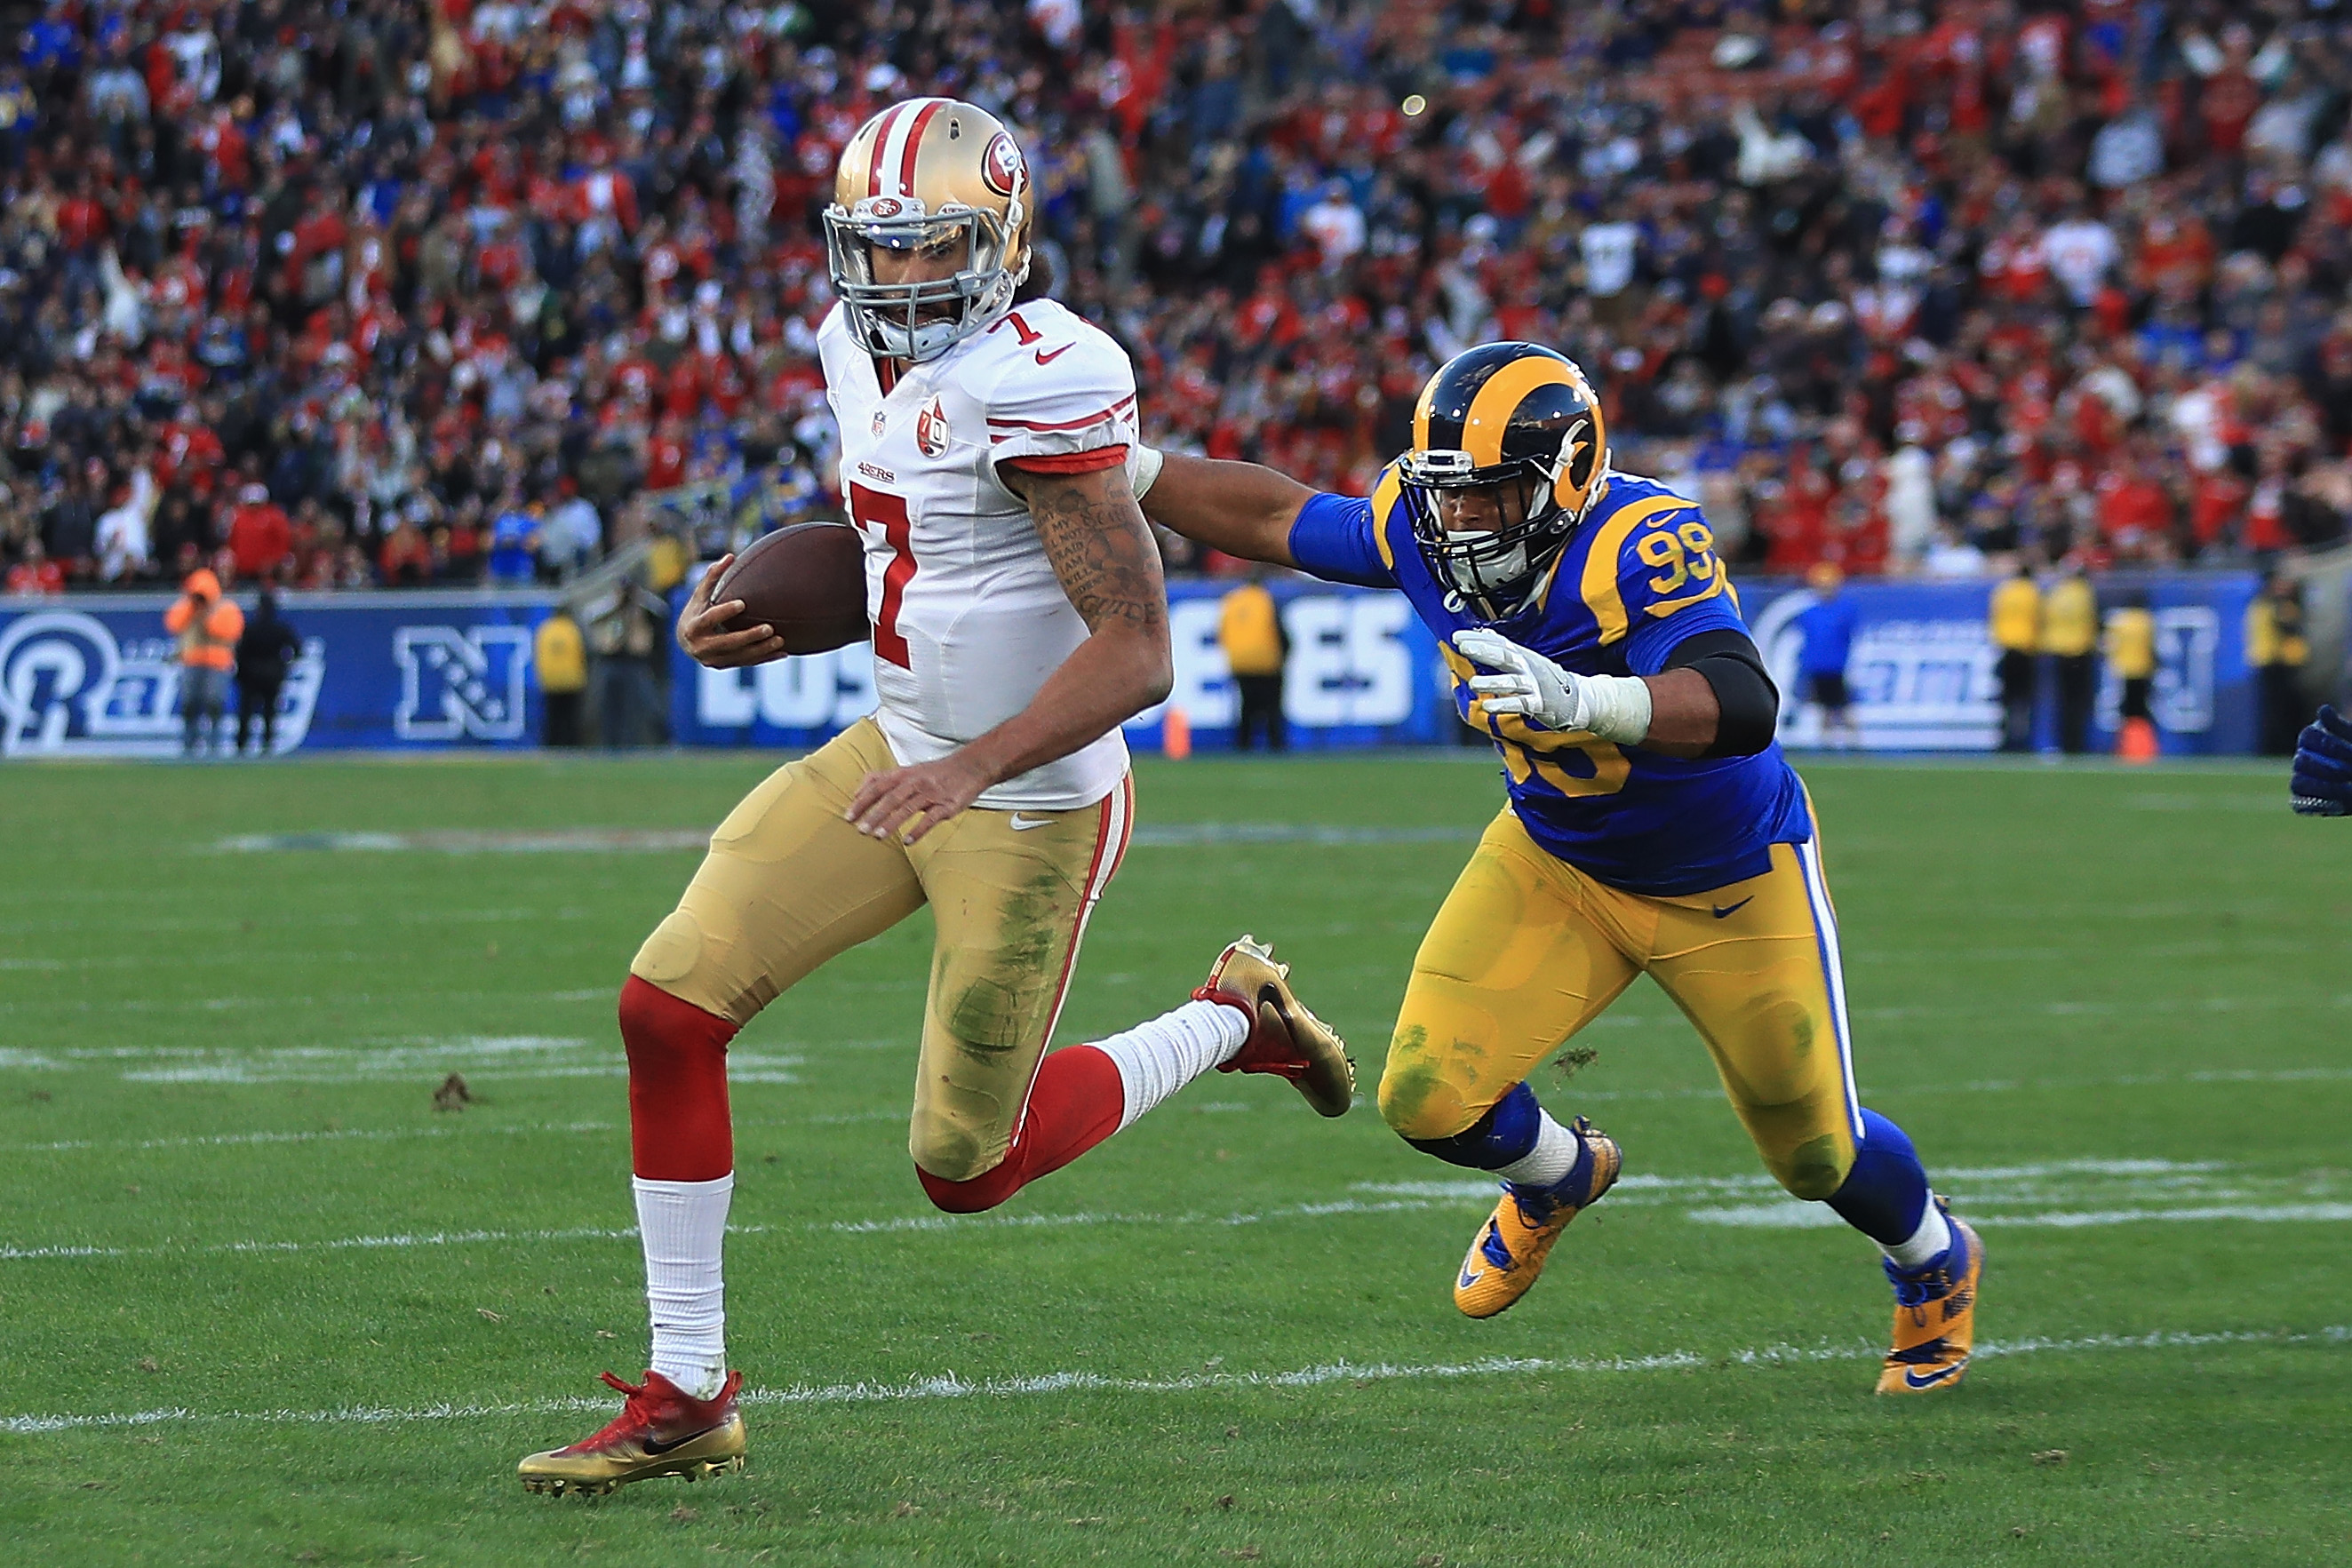 Colin Kaepernick won't be in the Denver Broncos' plans says one former player.